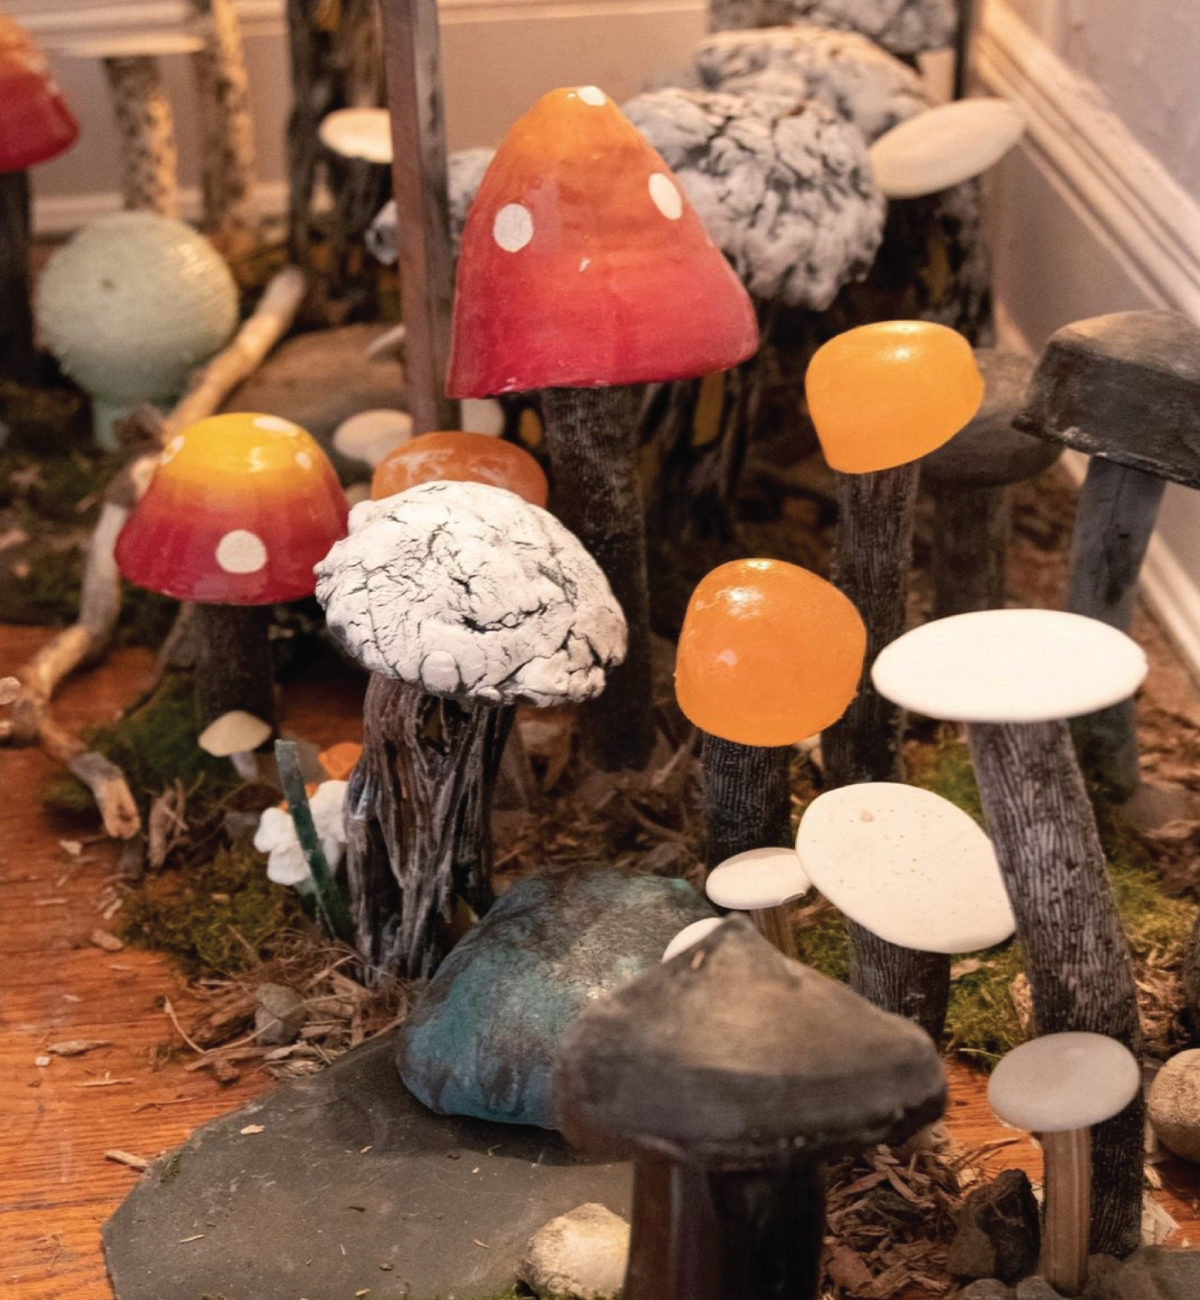 A collection of sculpted mushrooms.